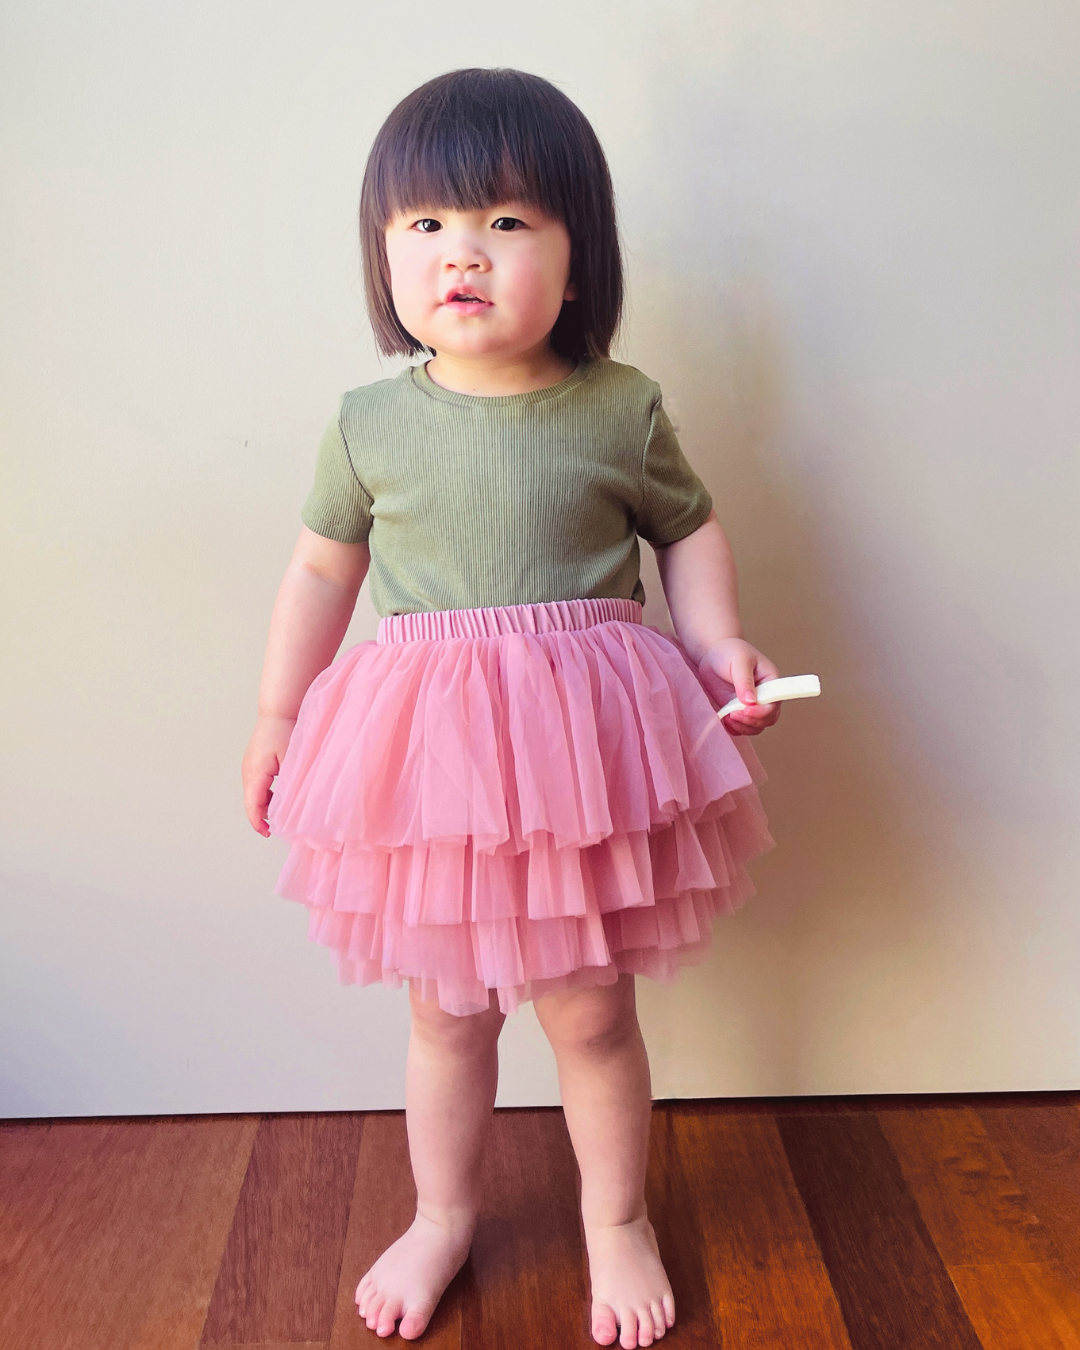 Charming toddler girl showcasing our Pale Rose Tutu Skirt. Explore comfort and style for your little one's precious moments with Dear Pastel.